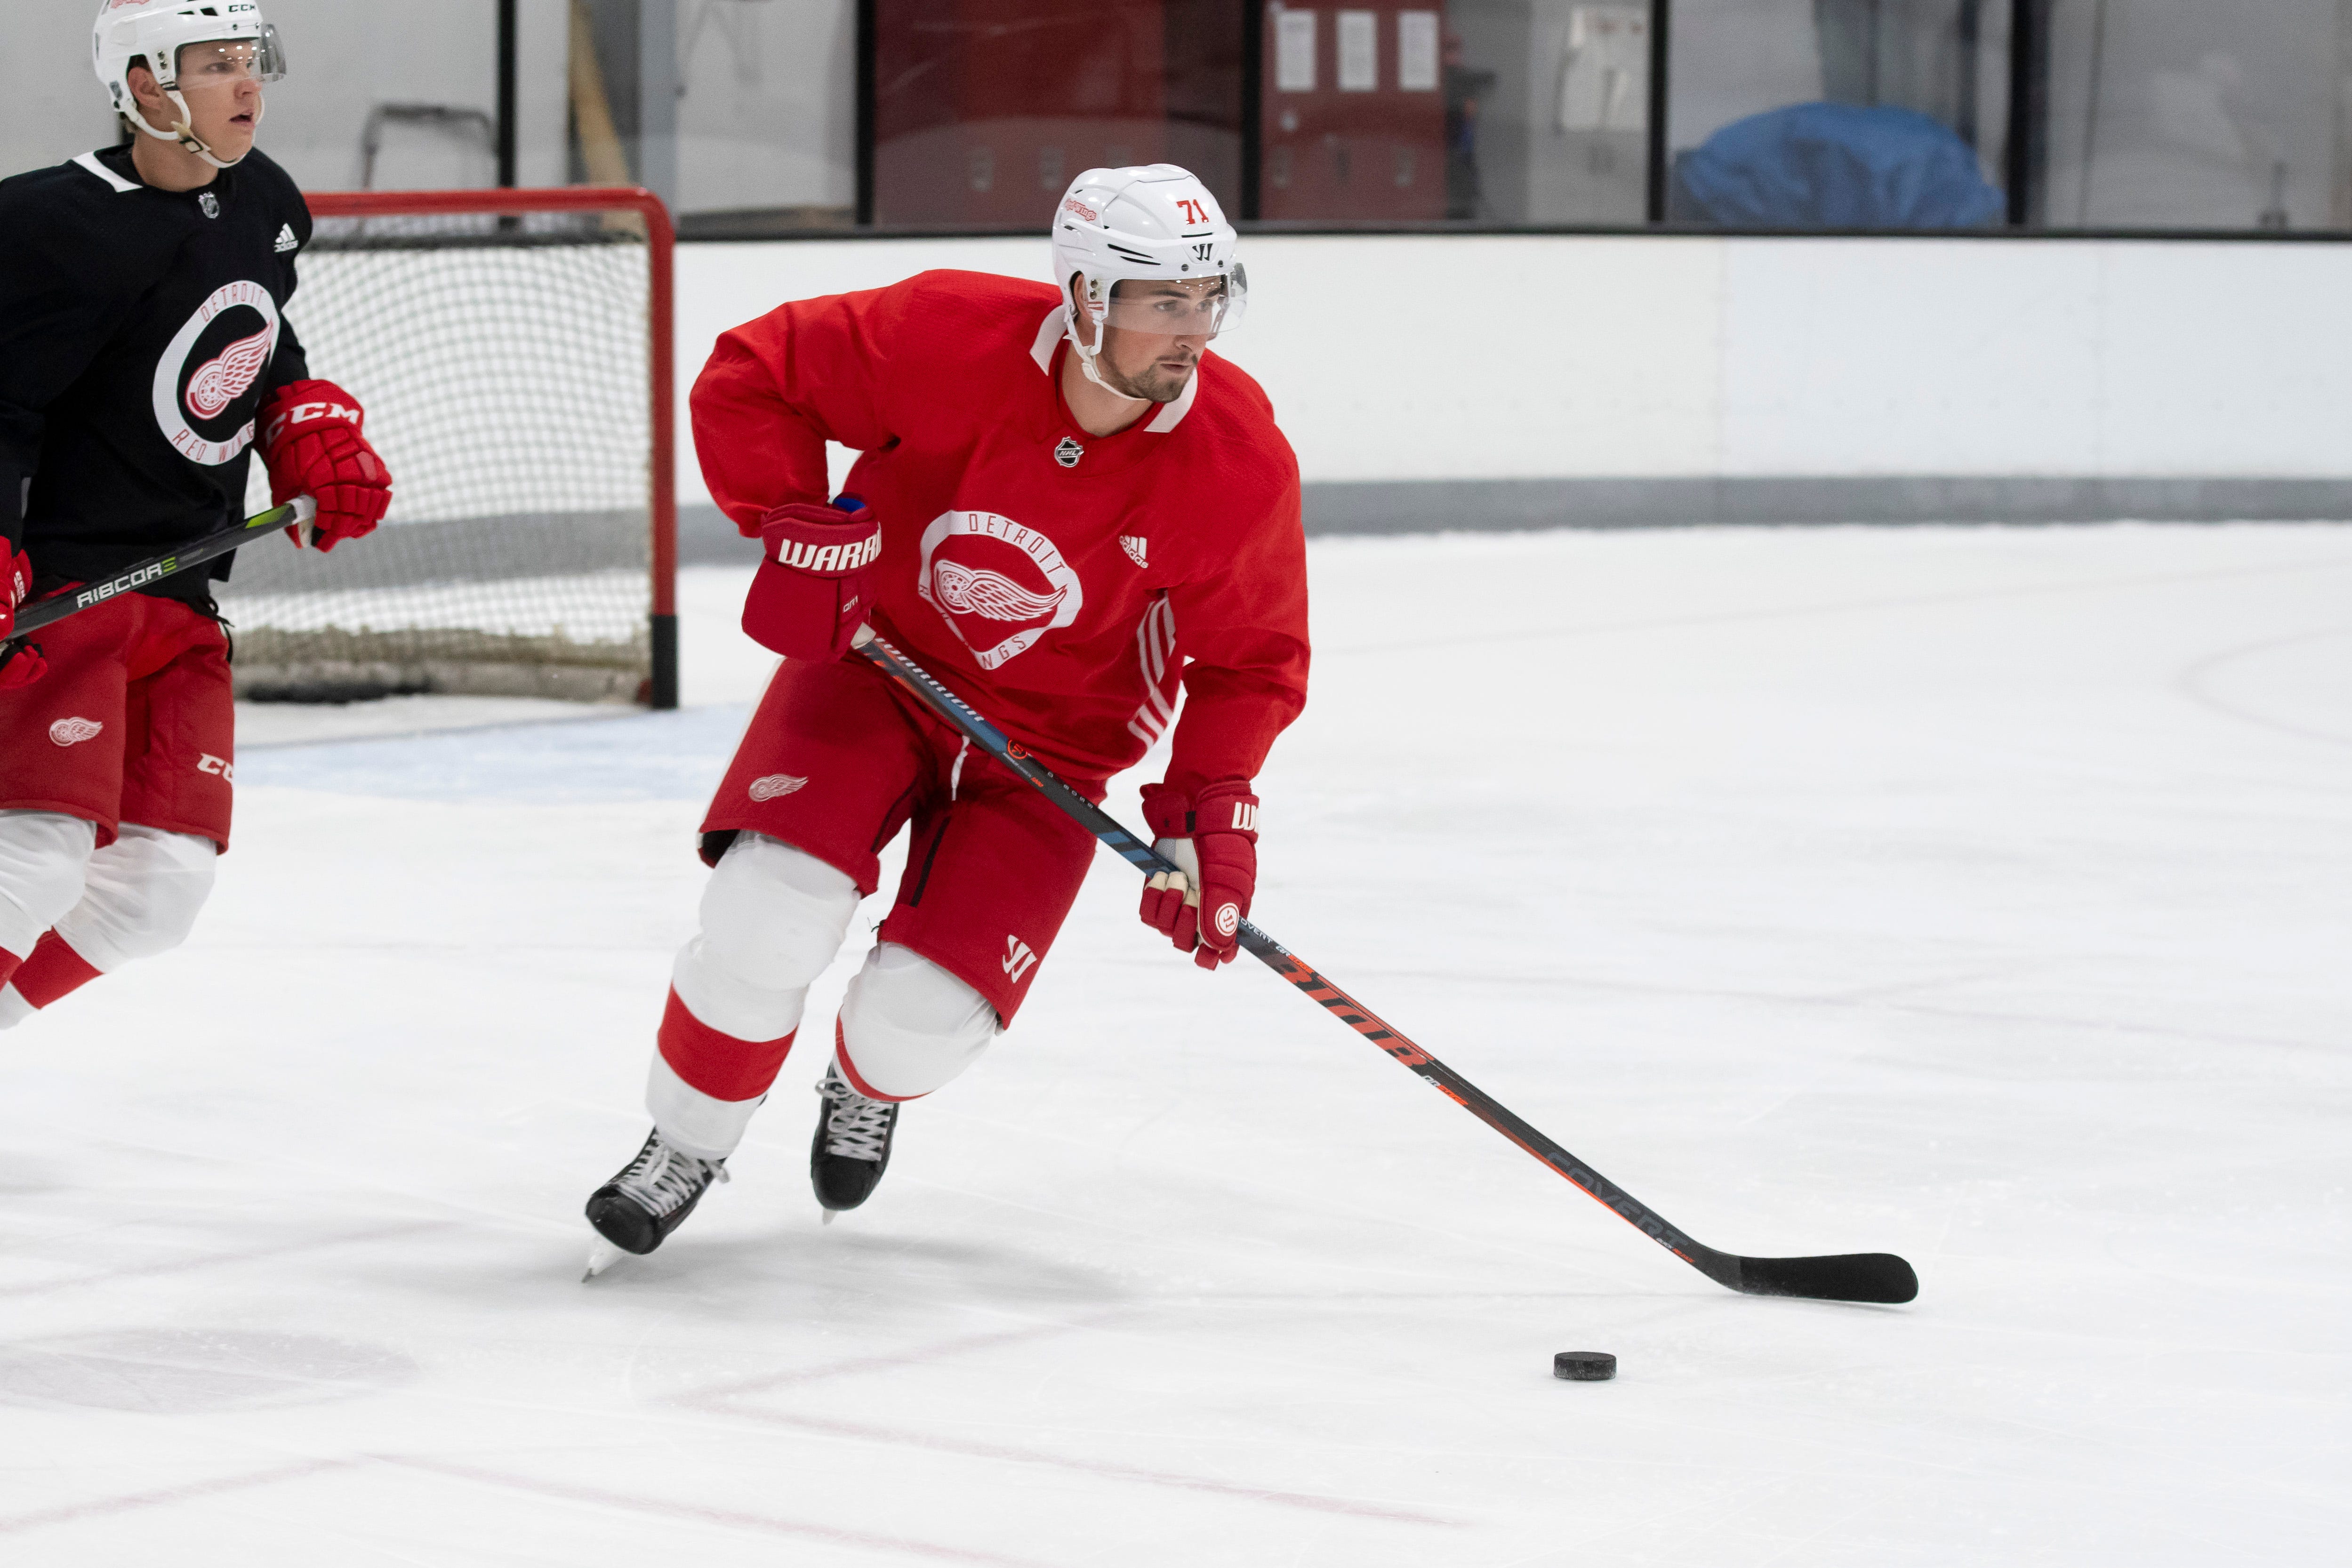 DYLAN LARKIN: AGE: 22. HT: 6-1. WT: 198. STATS: 82 games, 16 goals, 47 assists, 63 points. ANALYSIS: Growing into one of the best two-way forwards in the NHL, Larkin took major positive steps in his career last season and the Red Wings need more progress this winter.